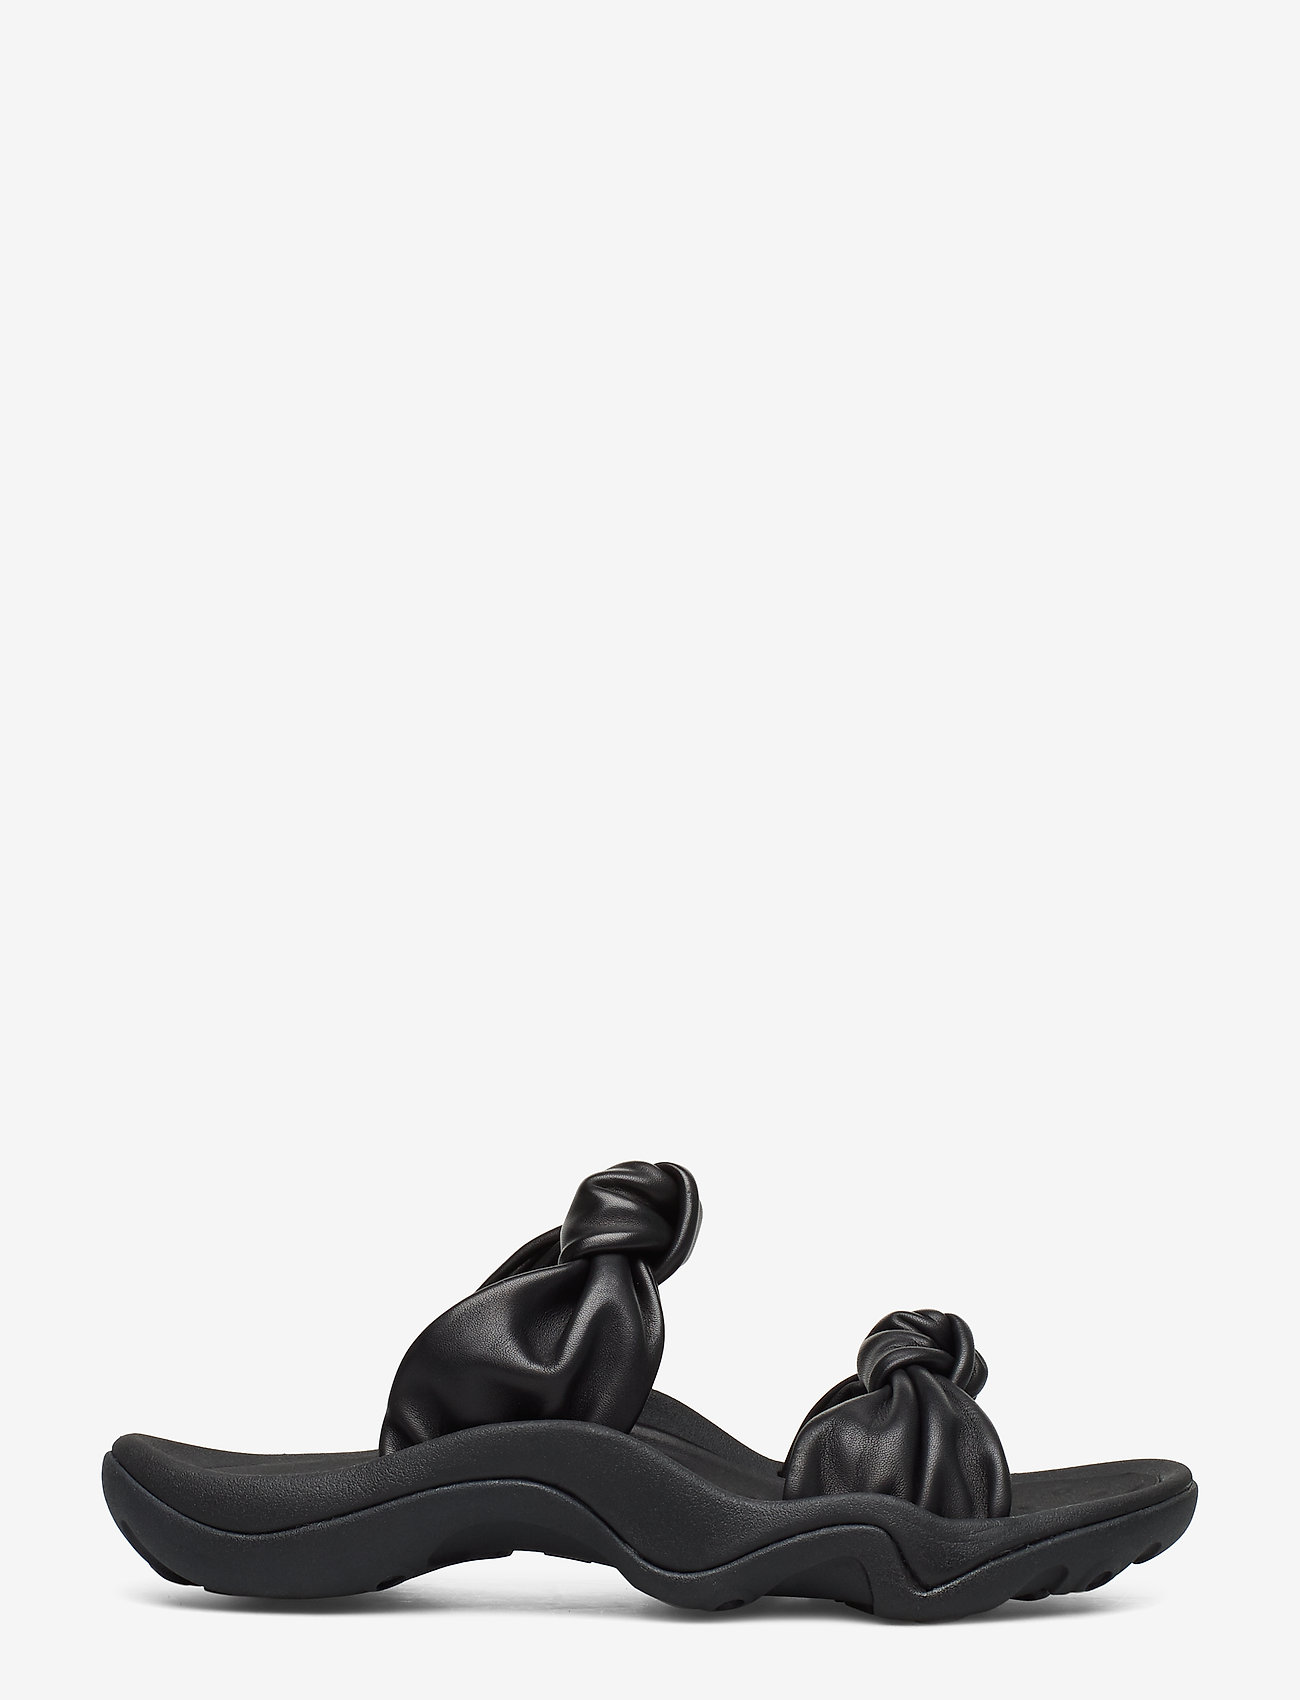 polo leather sandals